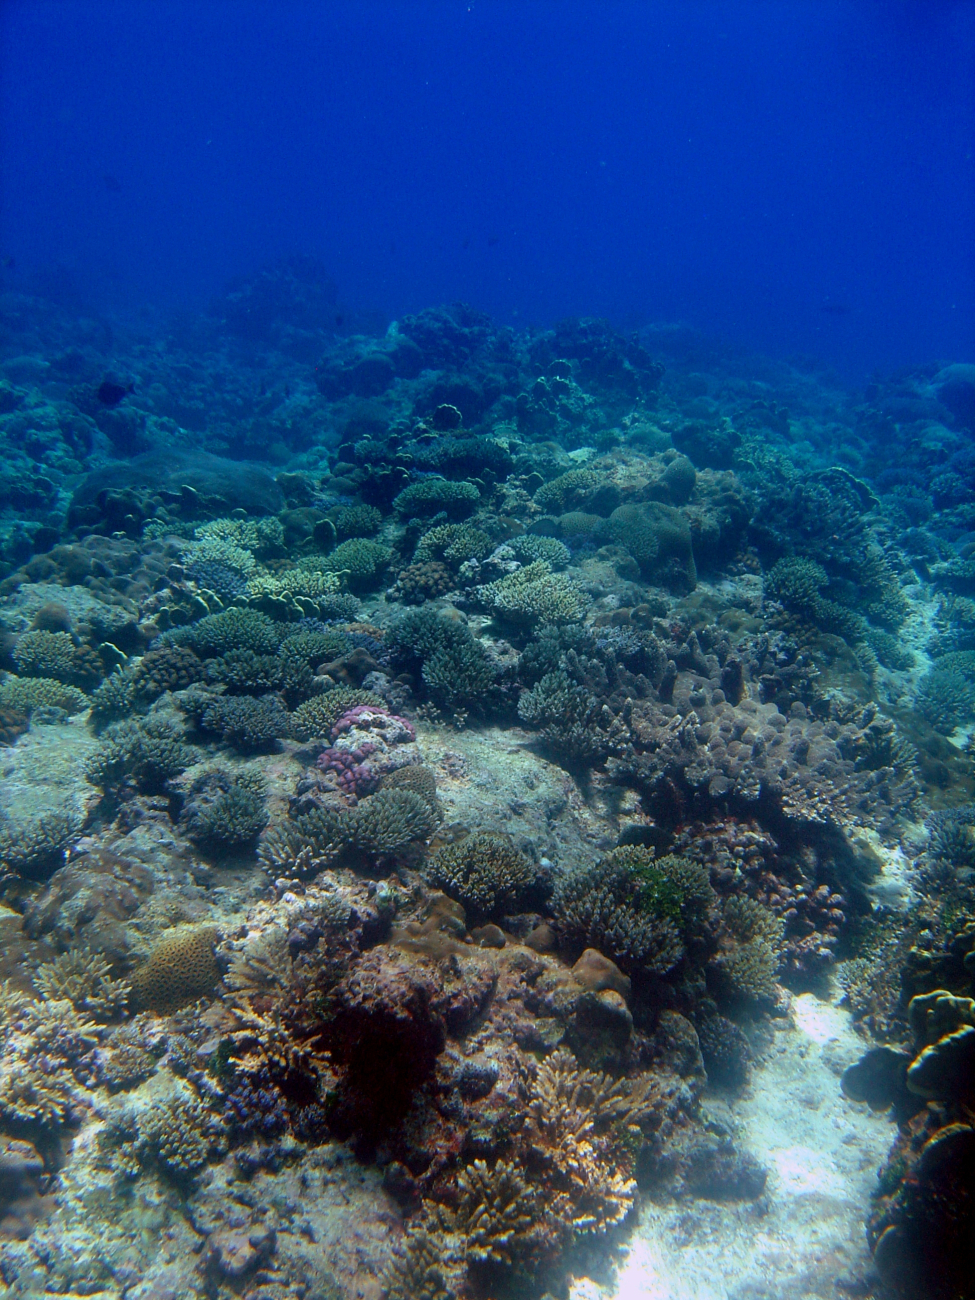 Reef scene with coral